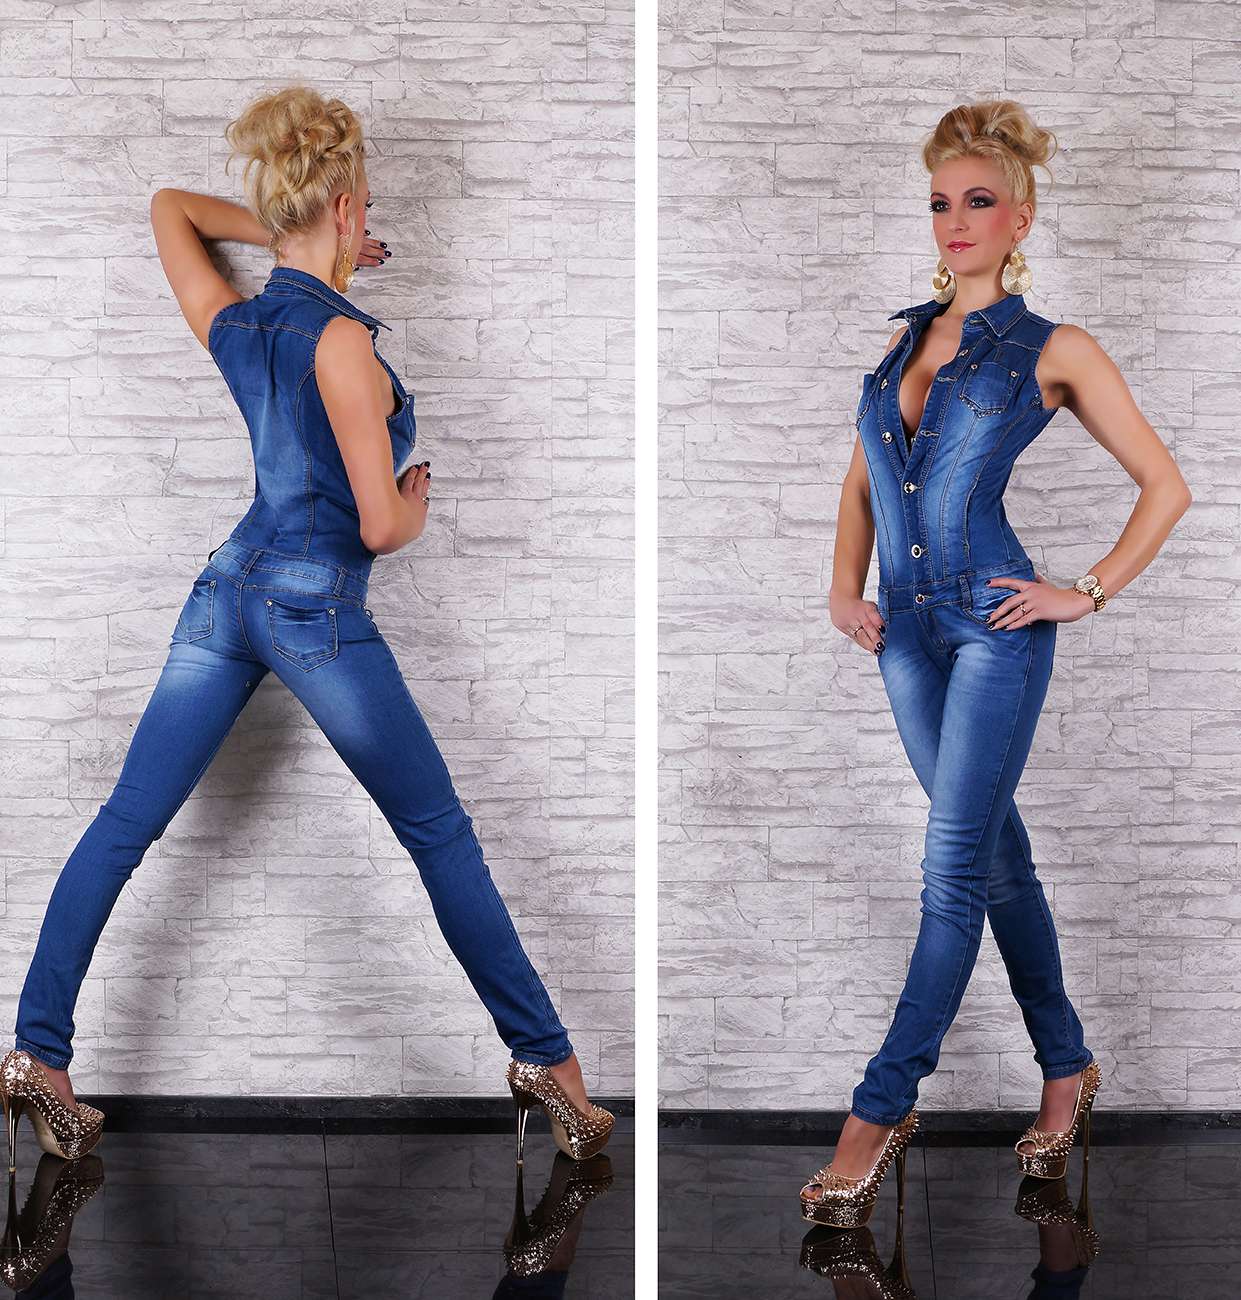 Sexy Women's Quality Denim Jumpsuit Overalls stretshy Jeans Blue washed ...